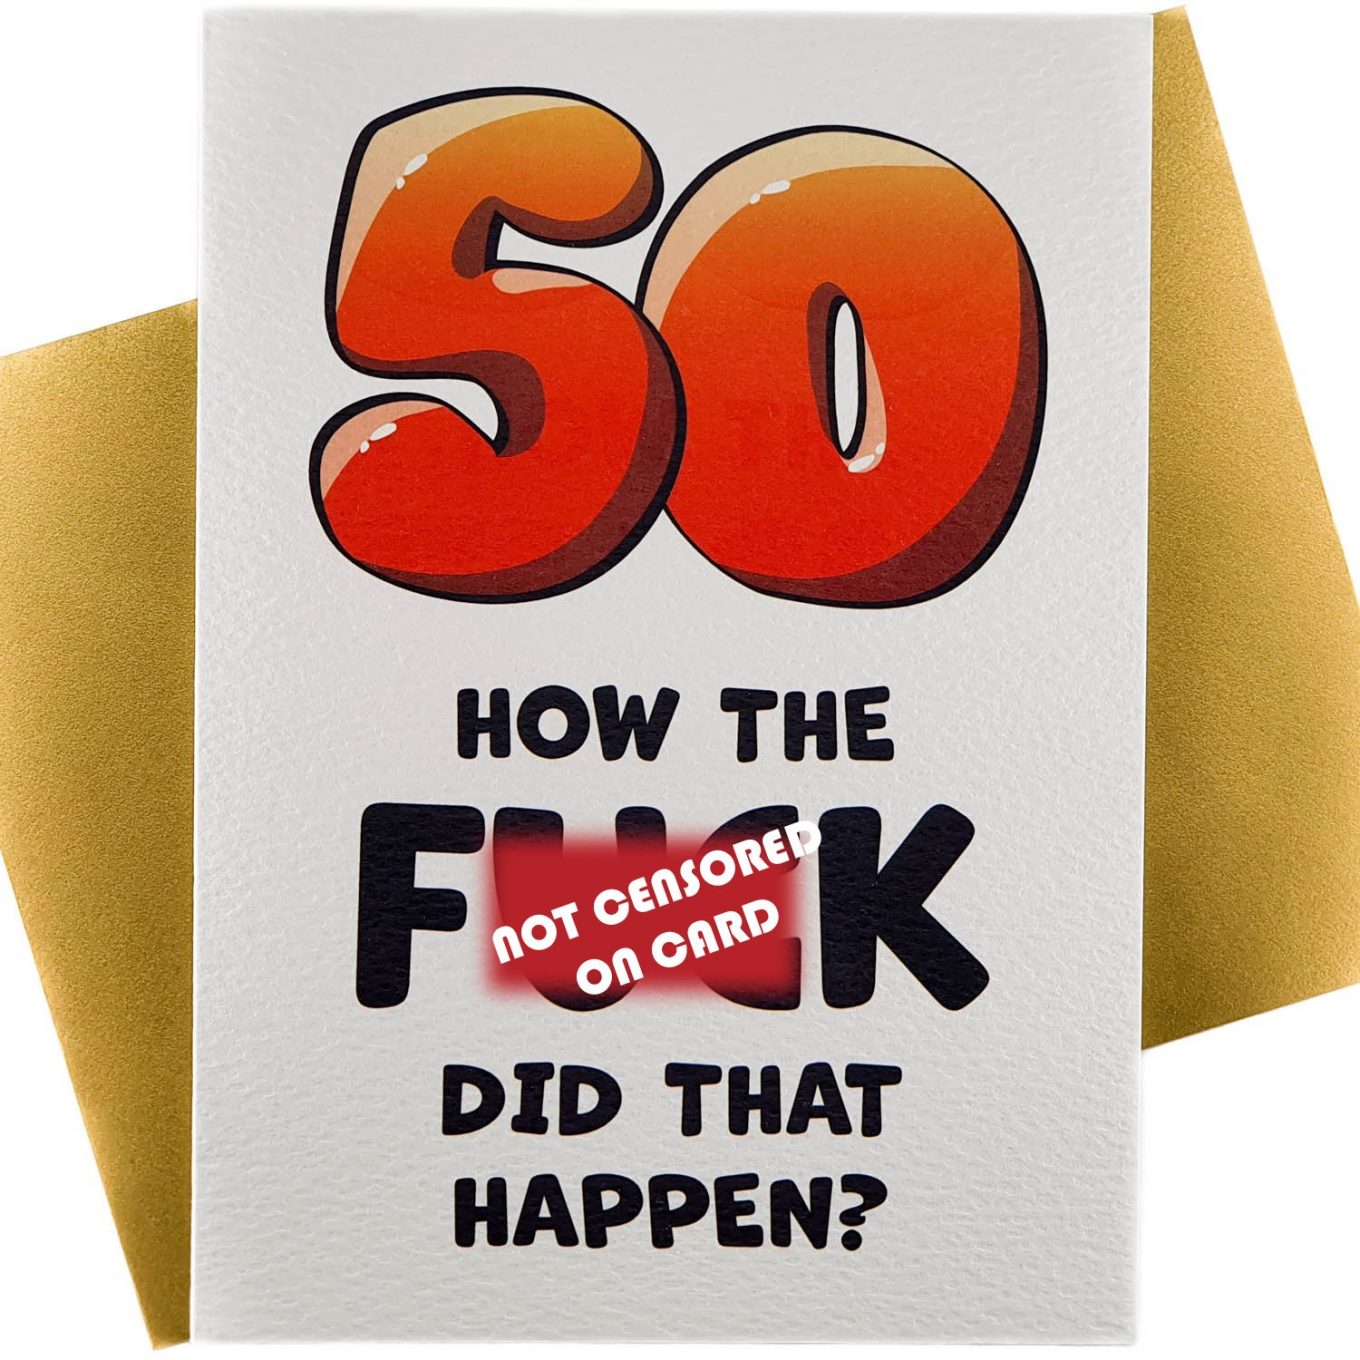 Funny Birthday Card 50th Anniversary How the Fuck Hilarious Gifts Humurous Luxury Gift Premium Love Present Made to impress! Gold Envelope